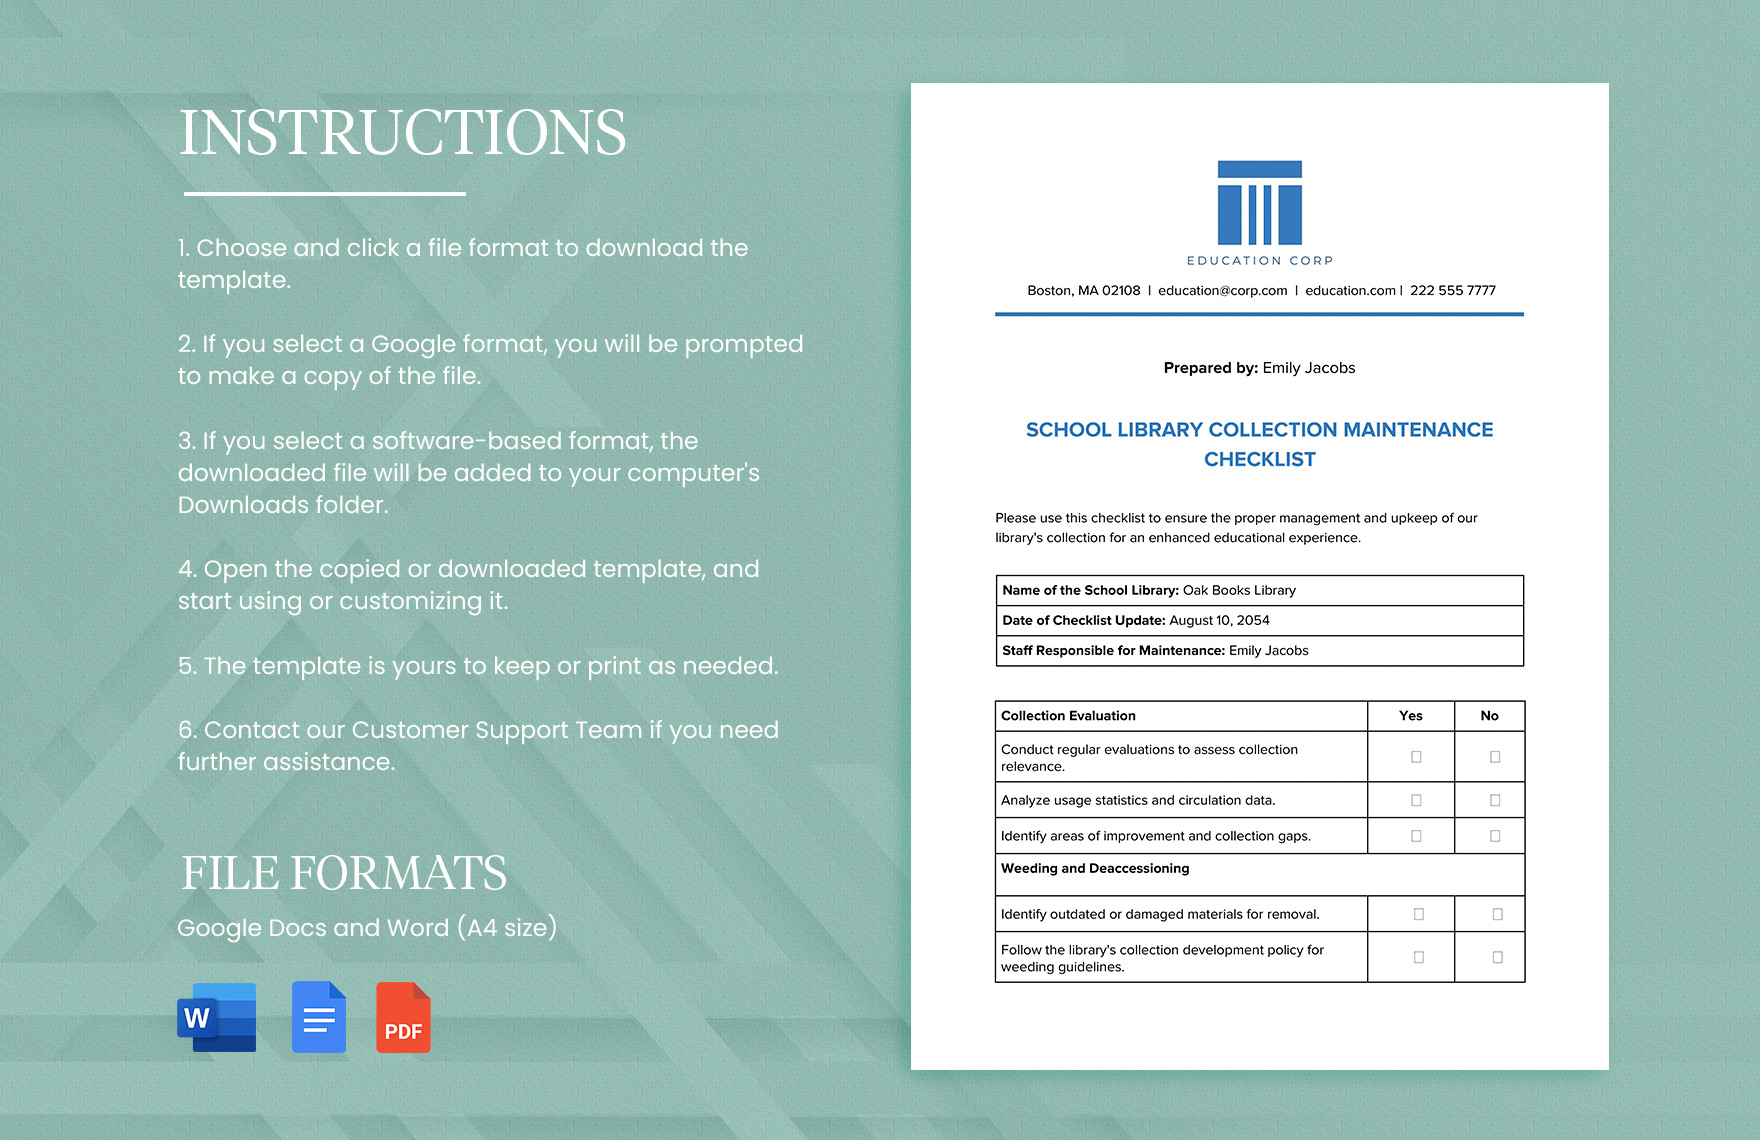 School Library Collection Maintenance Checklist Template